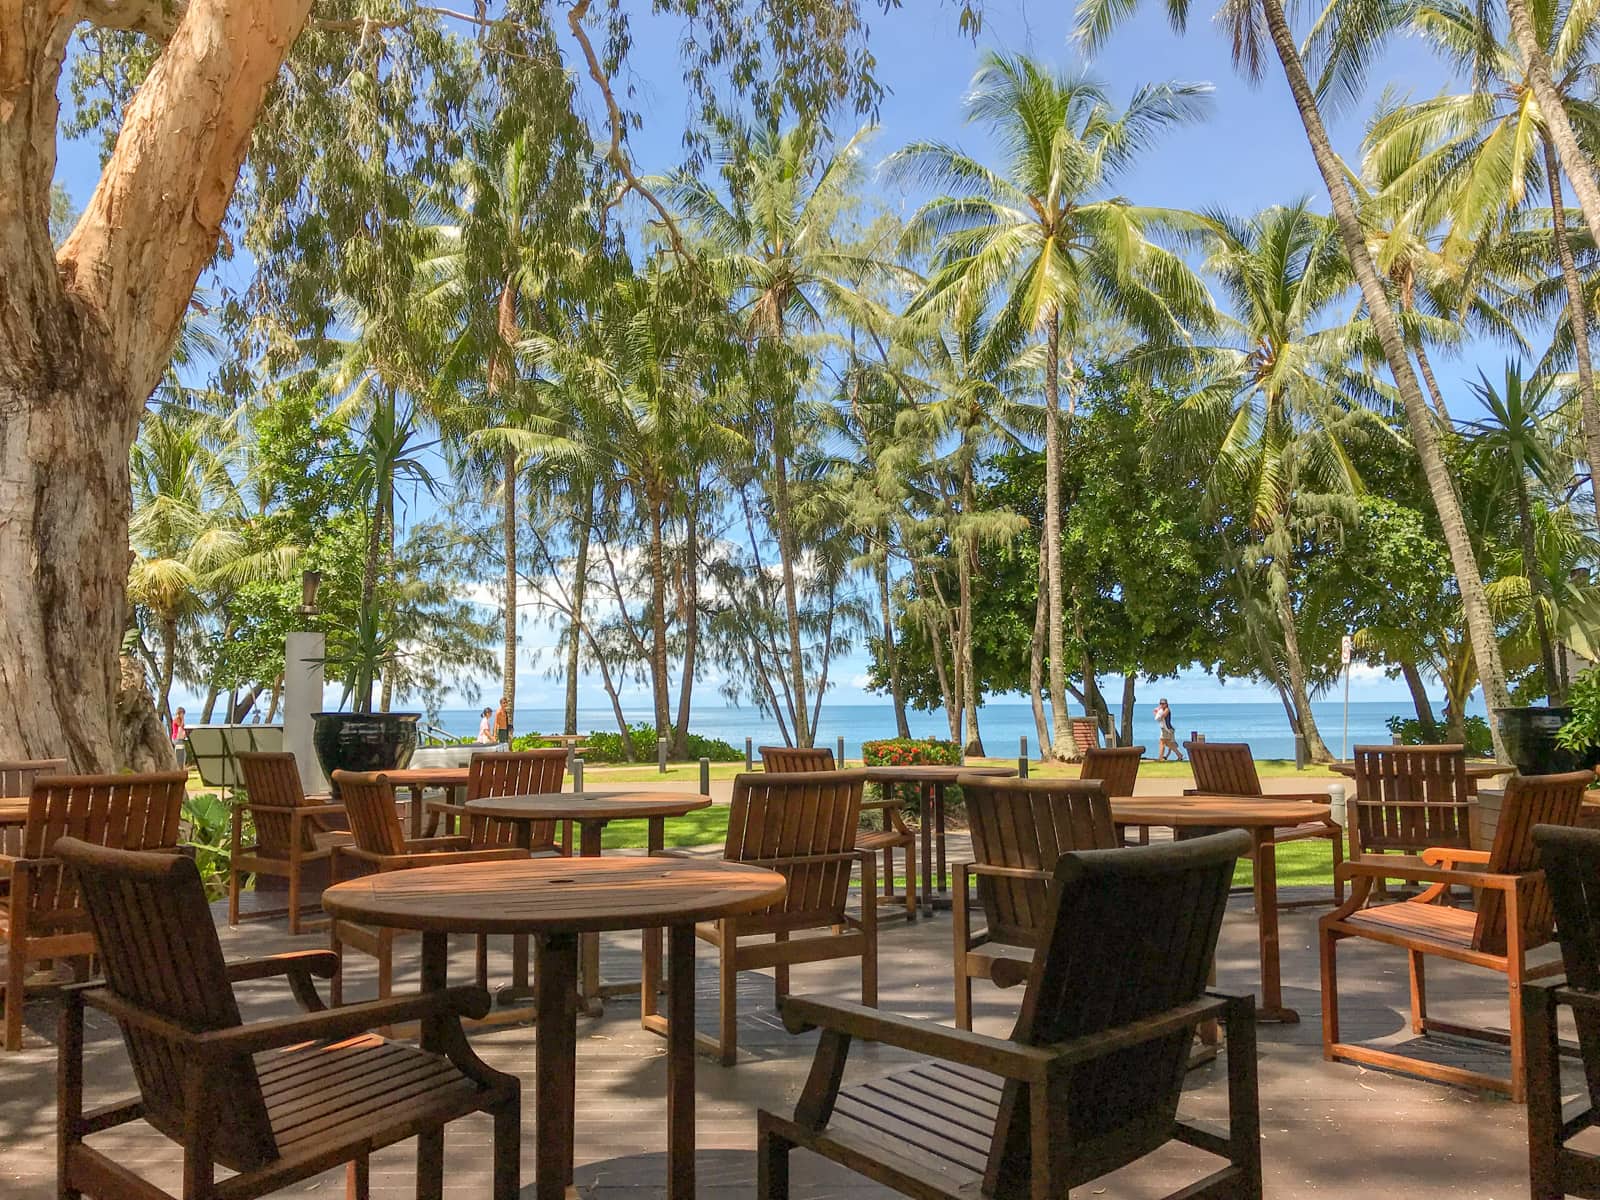 An outdoor dining area with wooden chairs and tables. In the background is a beach, the ocean, and many palm trees